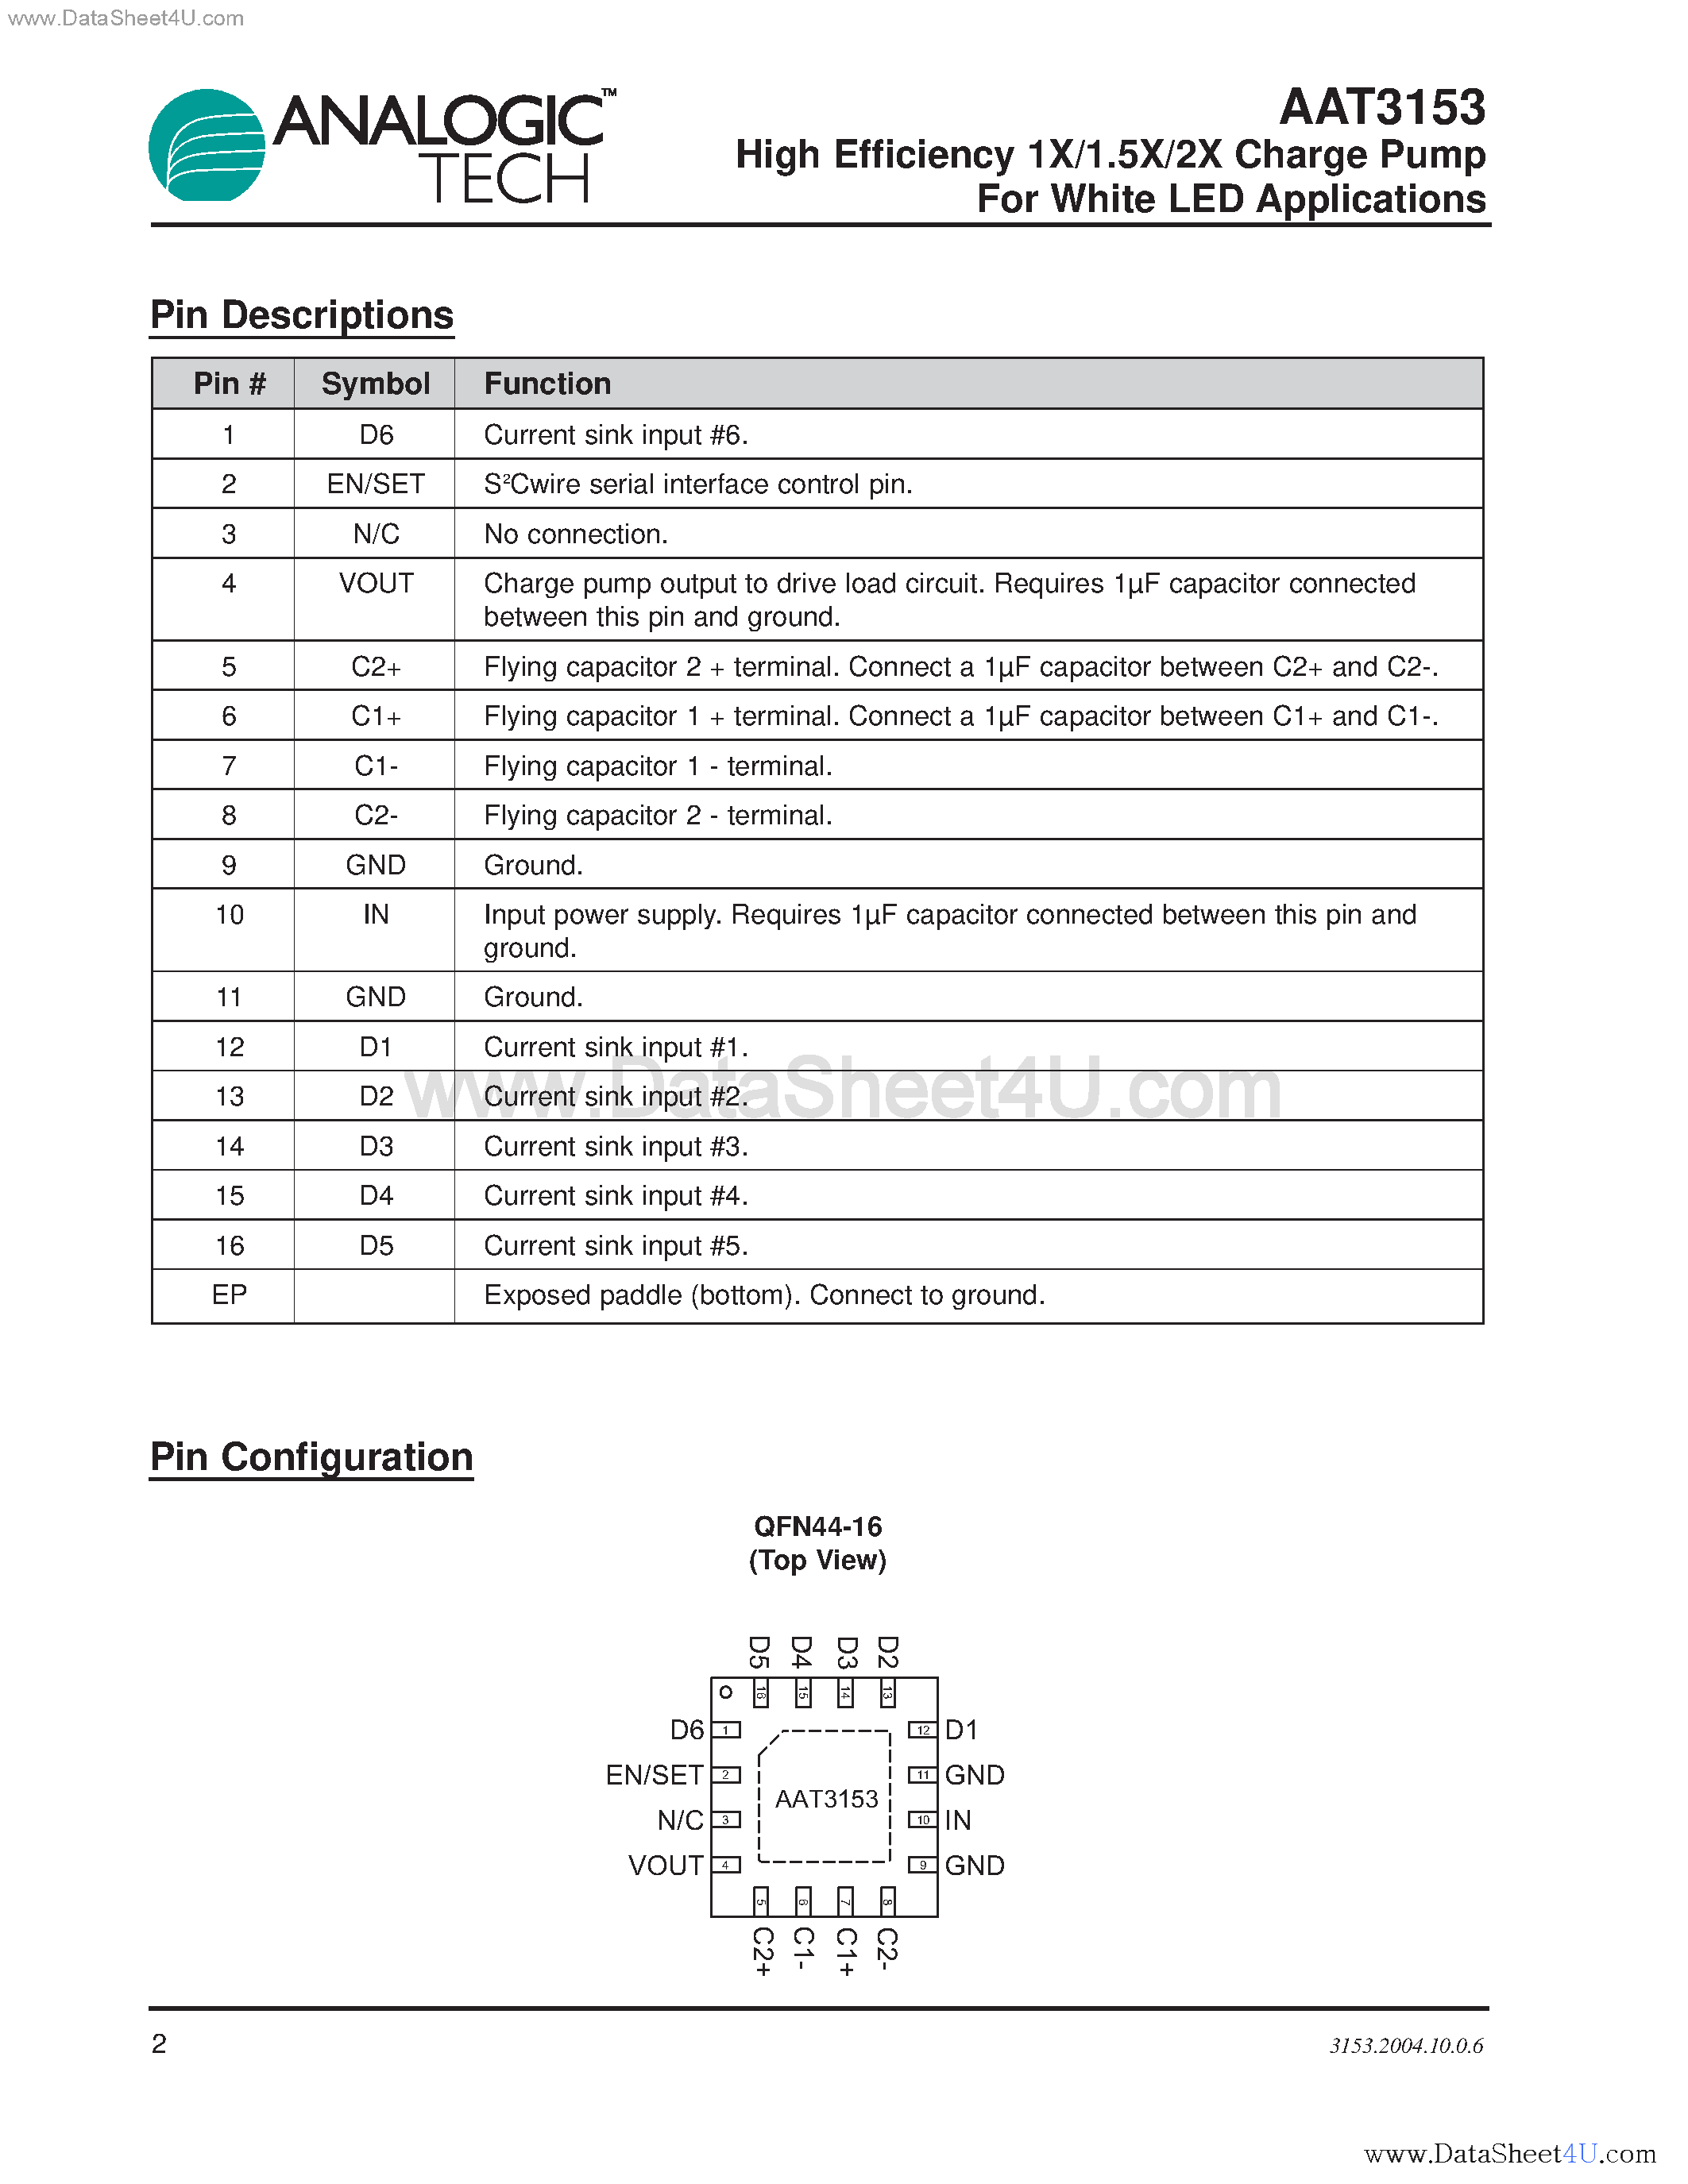 Datasheet AAT3153 - High Efficiency 1X/1.5X/2X Charge Pump For White LED Applications page 2